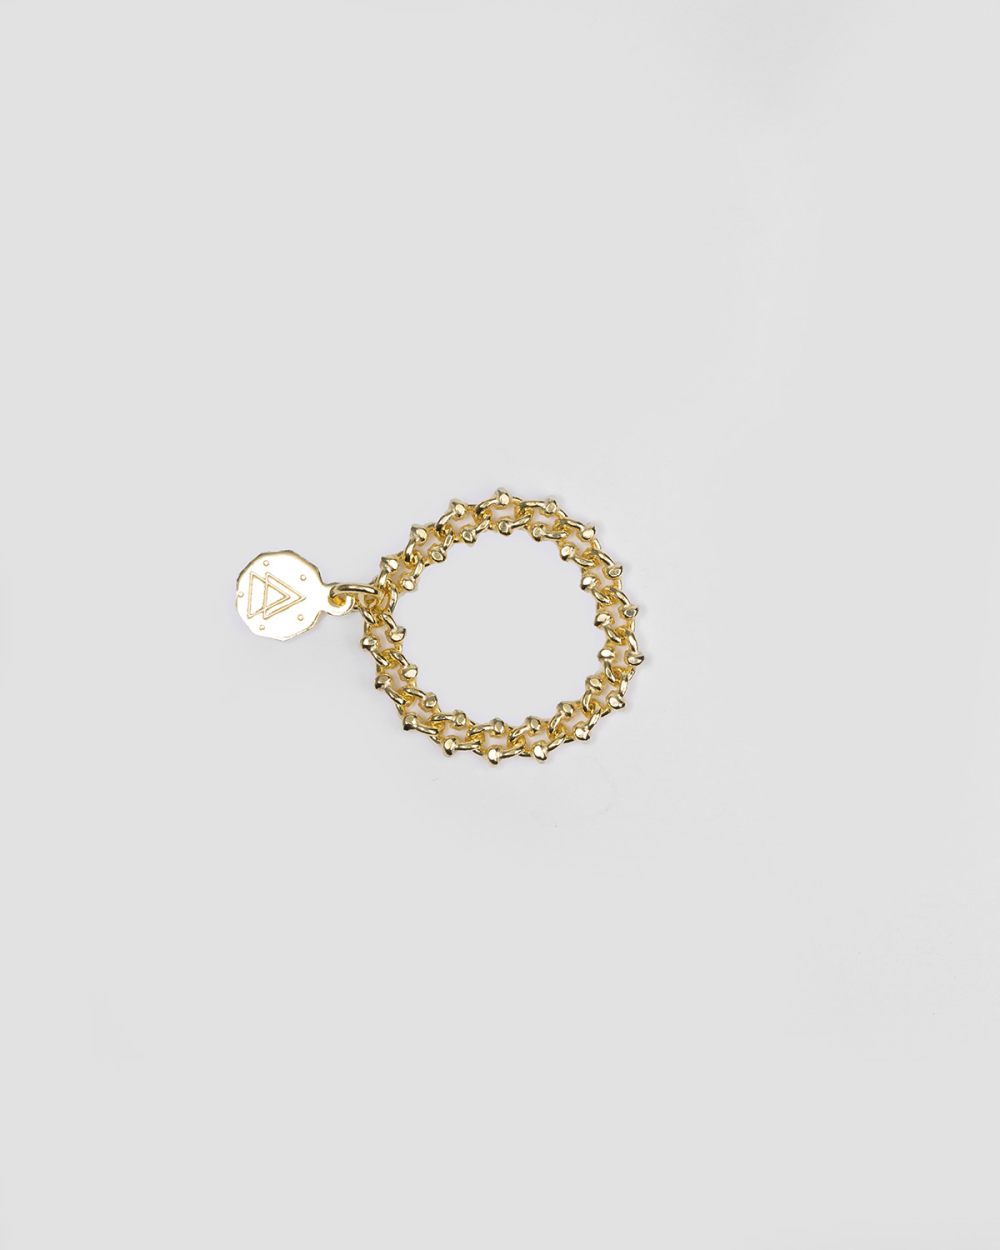 CRAB CHAIN RING / POLISHED YELLOW GOLD